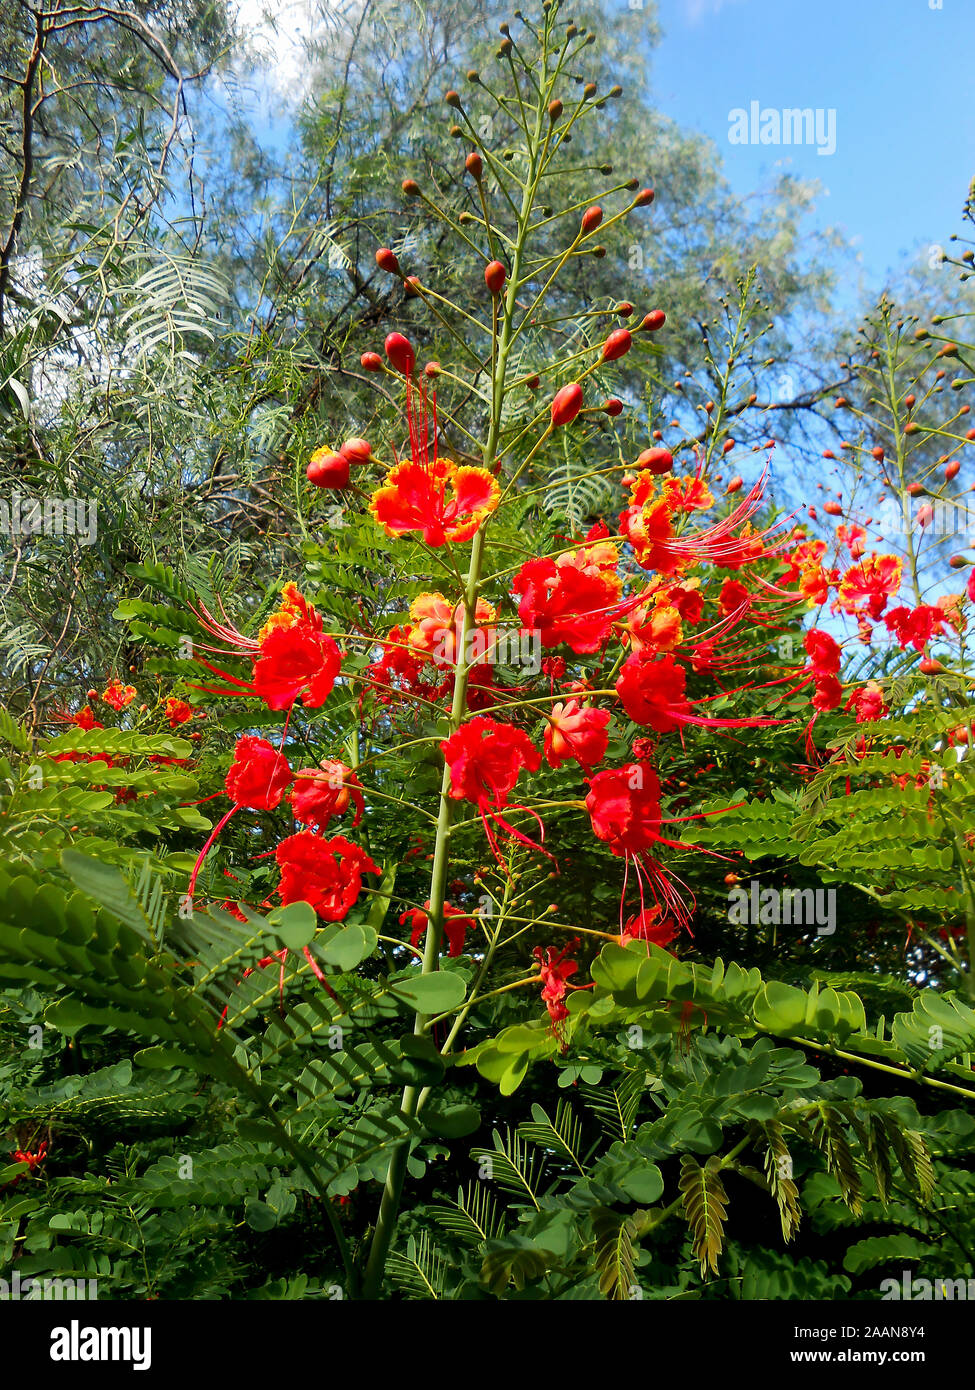 The red and yellow flower of a Mexican Bird of Paradise plant at Mount Coo Tha Botanical Gardens Brisbane Queensland Australia Stock Photo